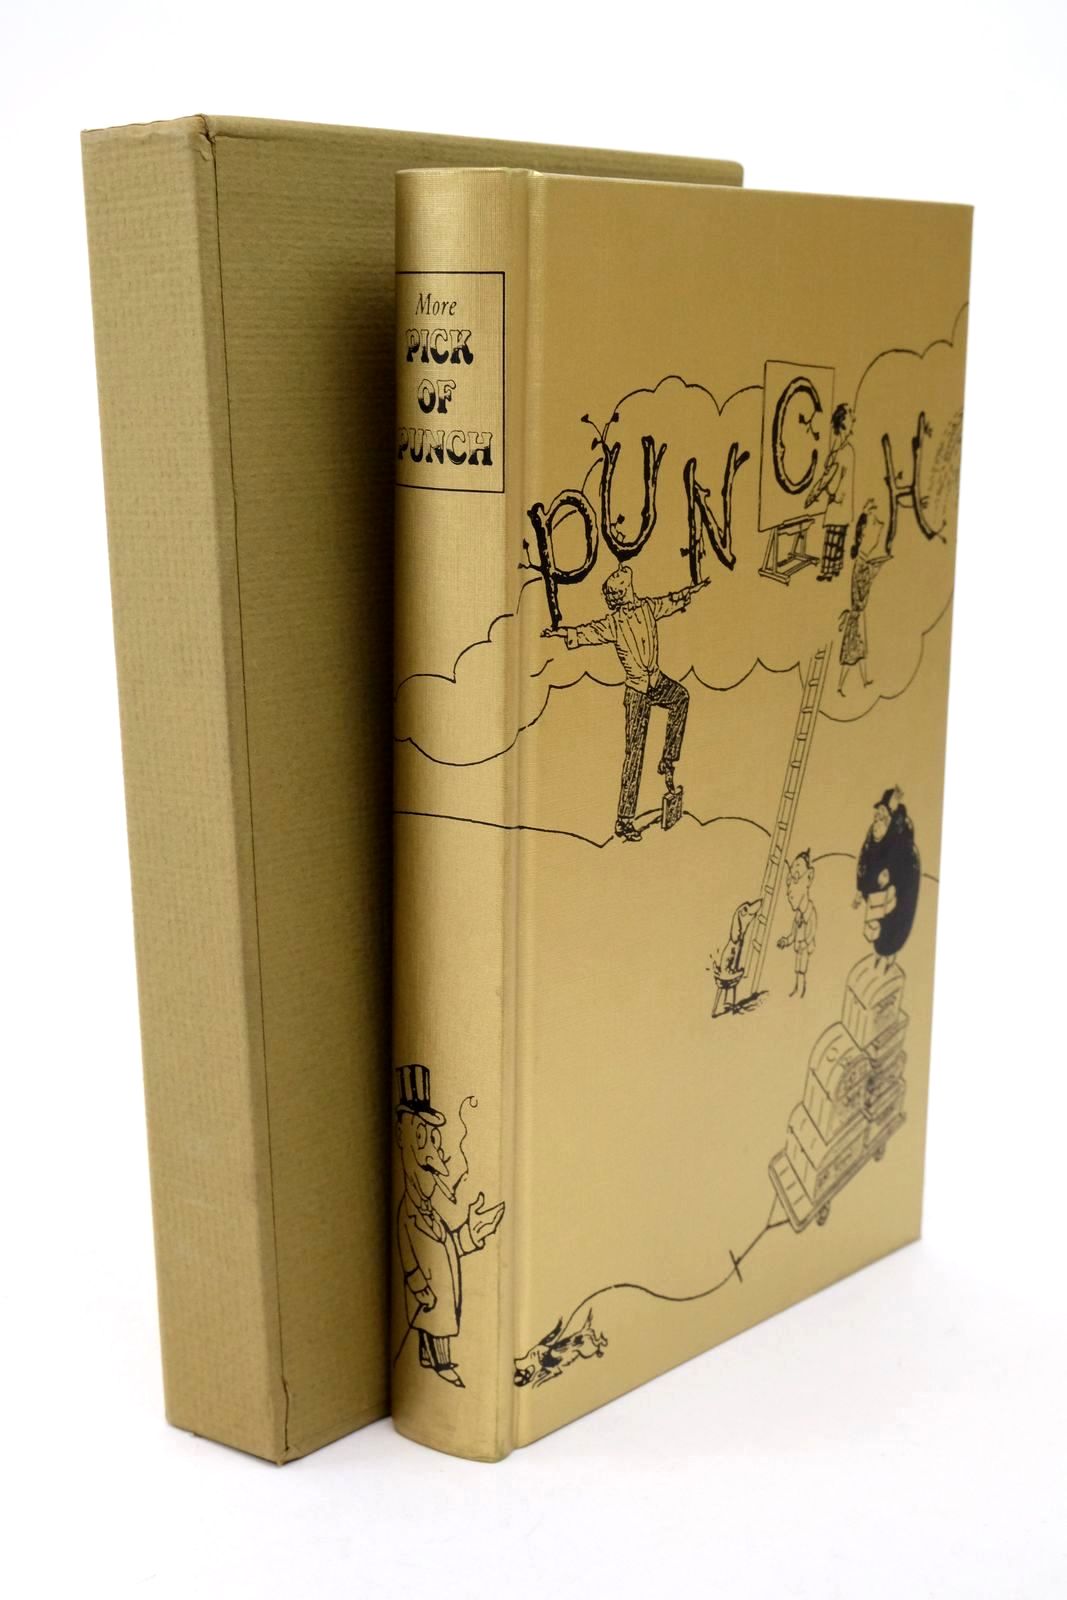 Photo of MORE PICK OF PUNCH written by Doran, Amanda-Jane published by Folio Society (STOCK CODE: 1322552)  for sale by Stella & Rose's Books